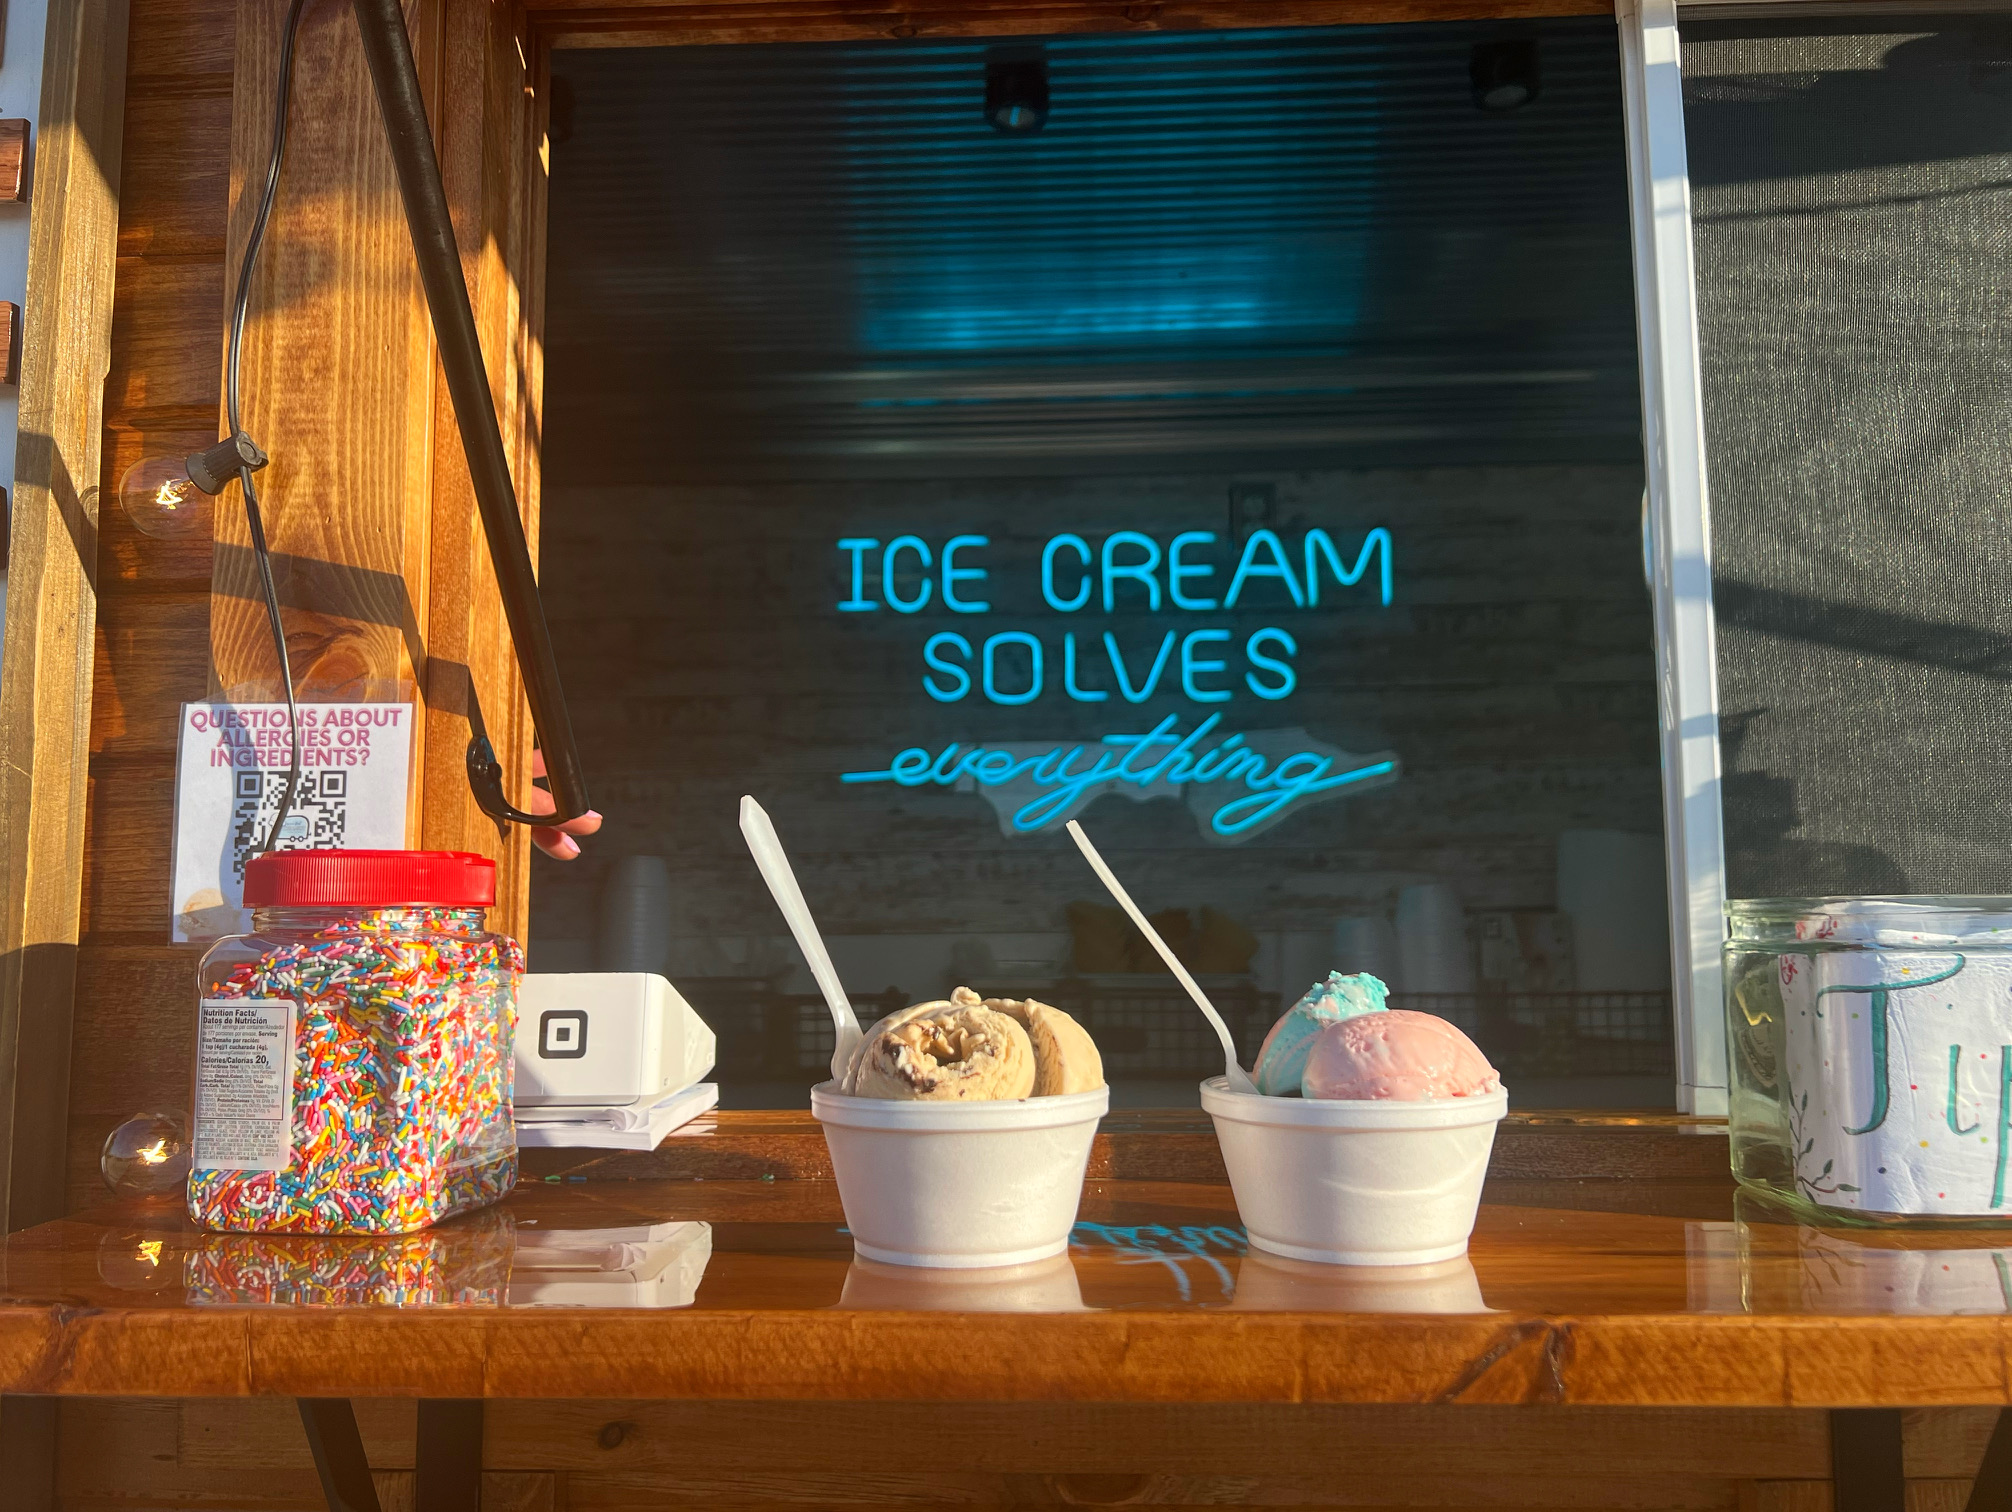 Two cups of ice cream sit on a wooden ledge on the ice cream truck Main Street Creamery. Photo by Alyssa Buckley.